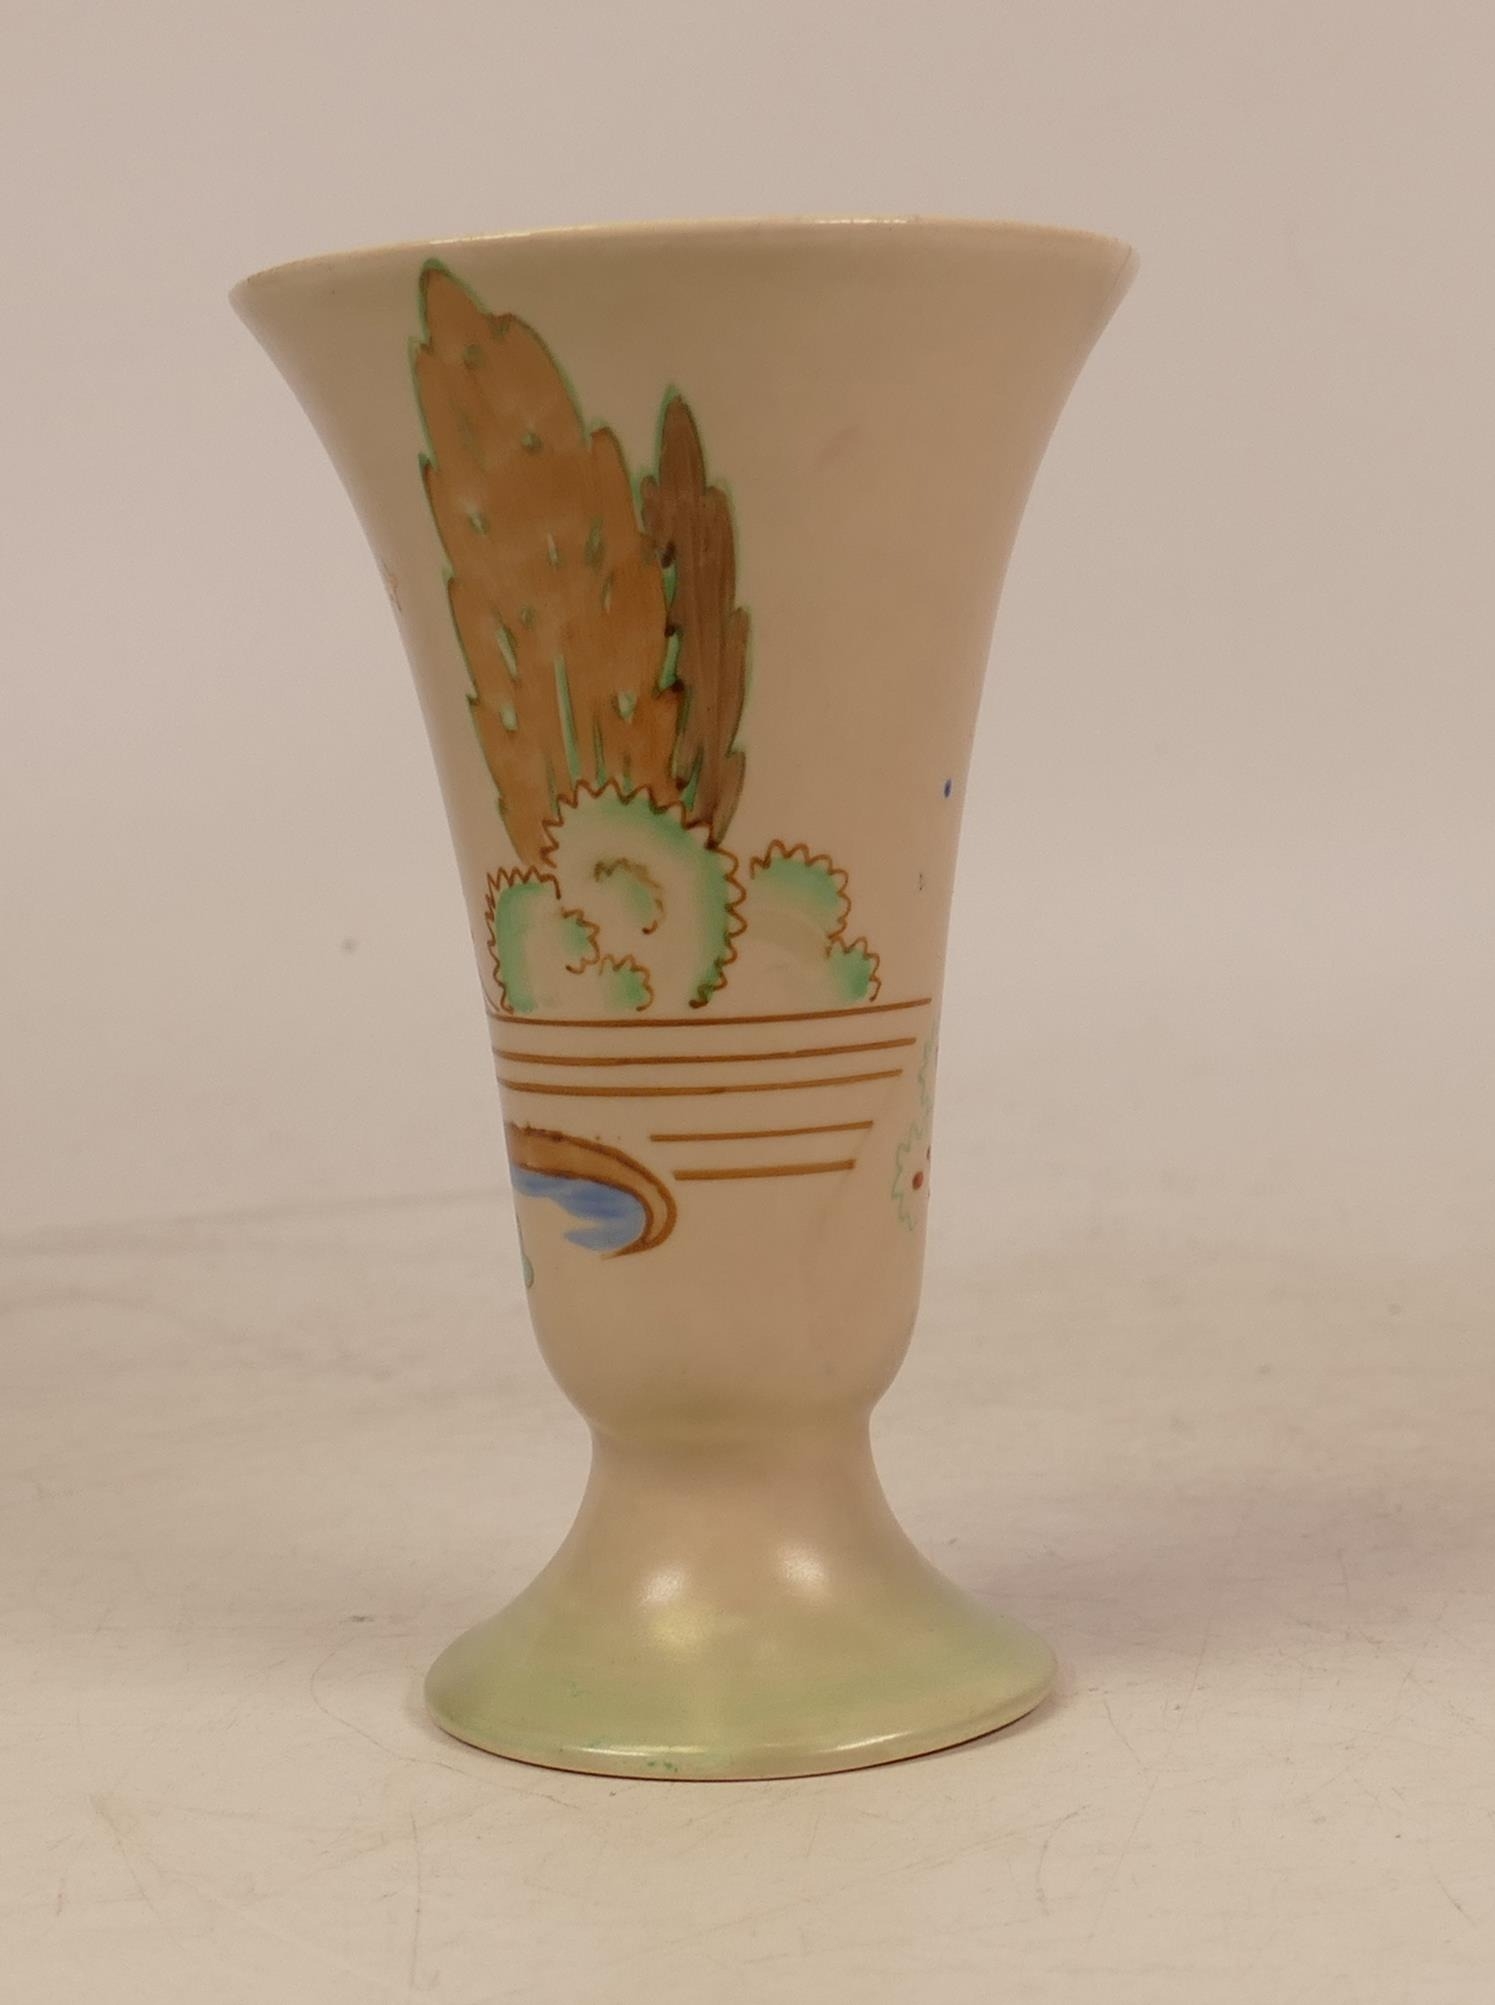 Clarice Cliff Small Footed Vase - Napoli design